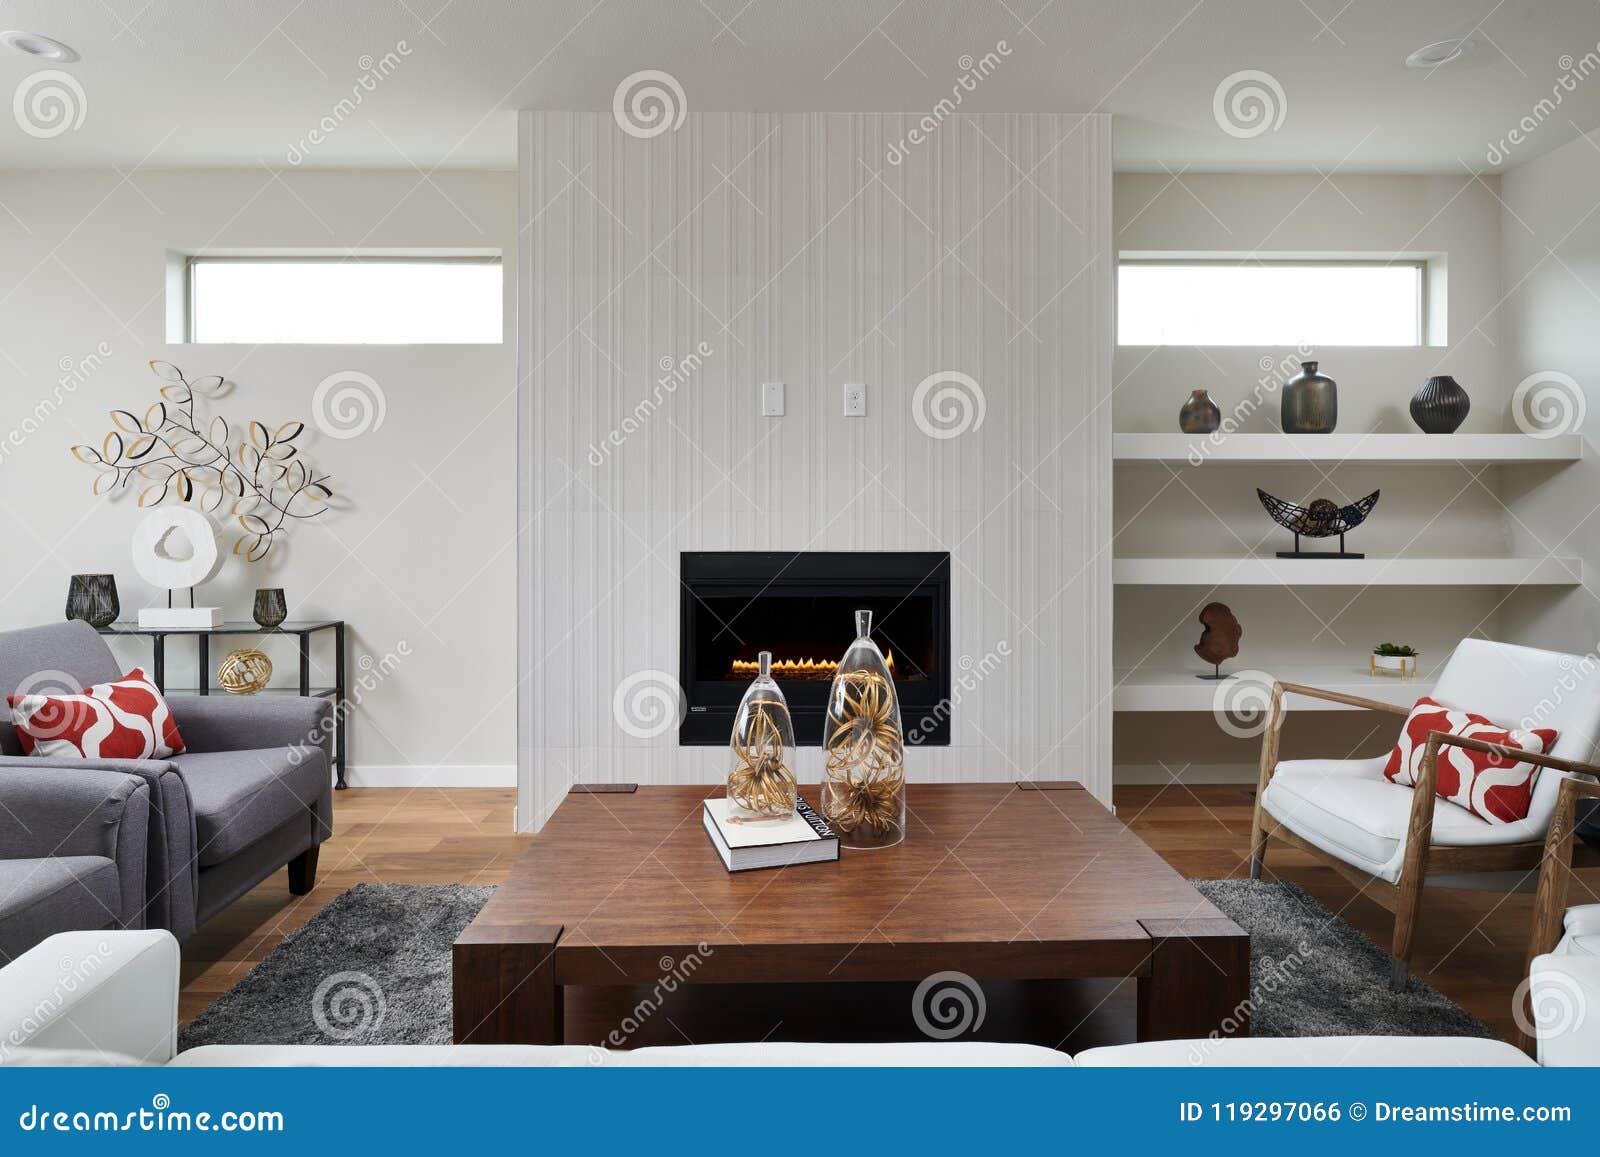 Comfy Living Room With Fireplace Stock Photo Image Of Architecture Kitchen 119297066